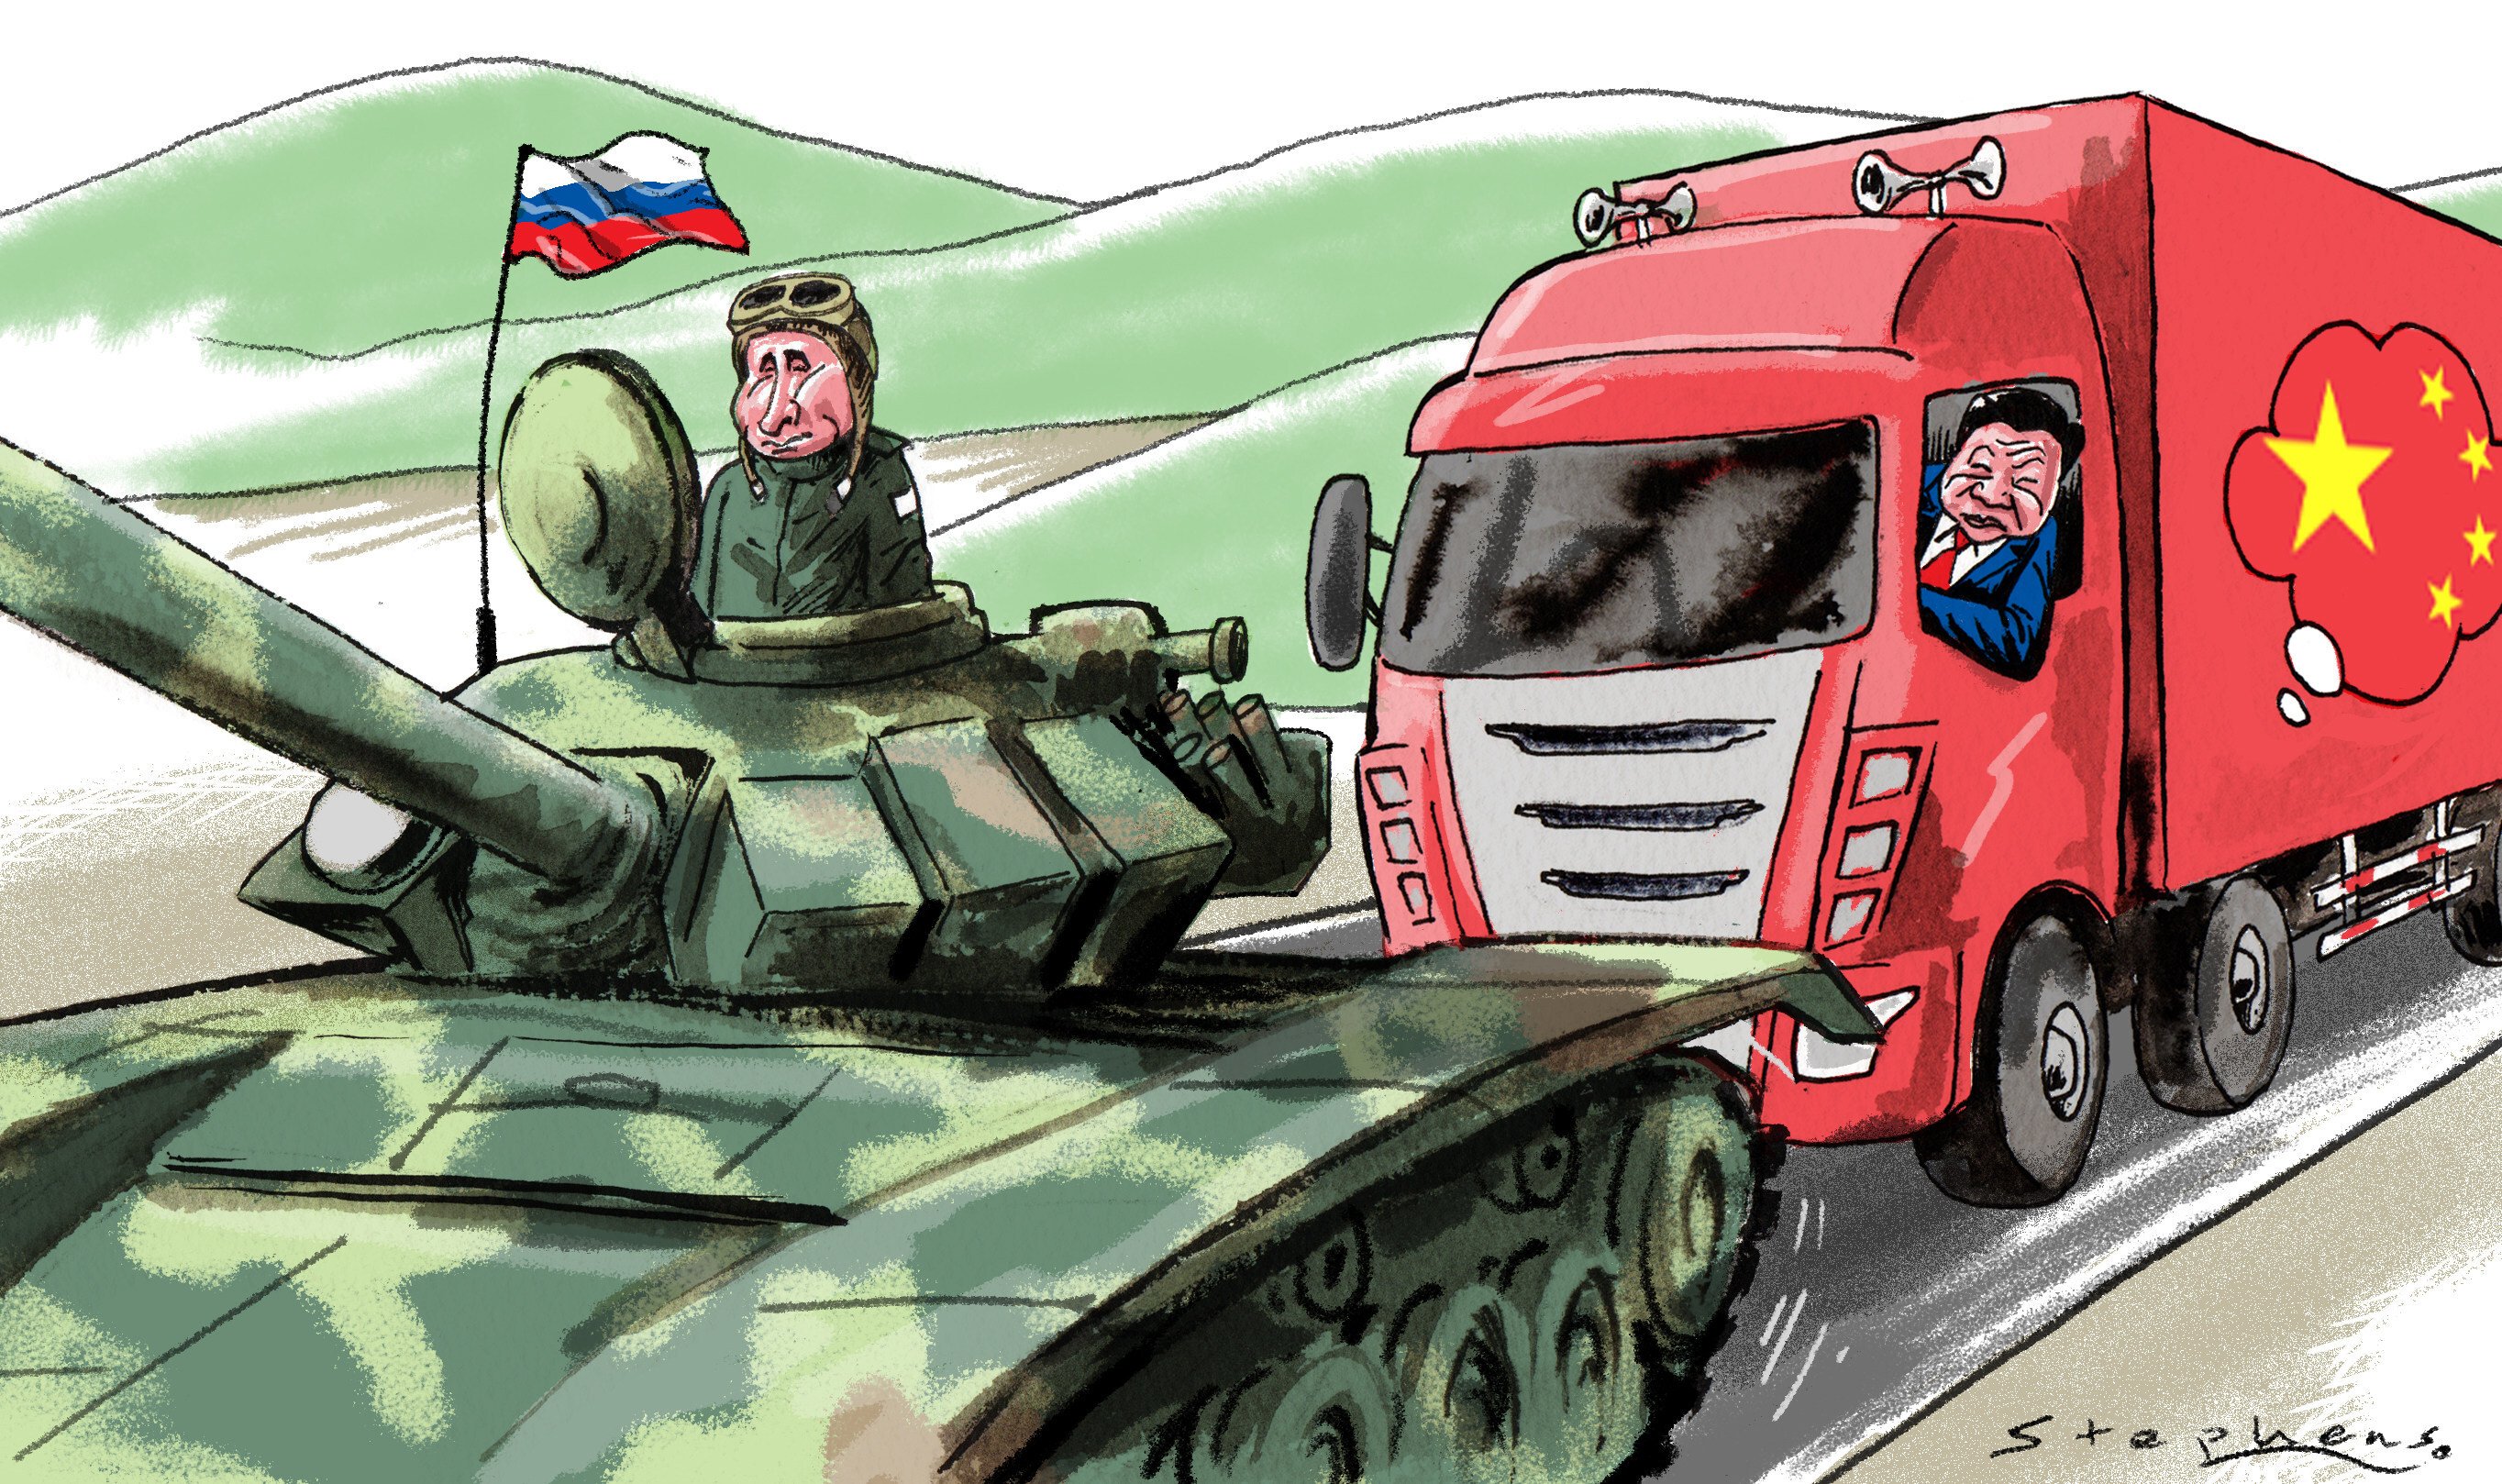 The relationship between Moscow is growing stronger, but the two countries have vastly different approaches to securing their strategic interests. Illustration: Craig Stephens